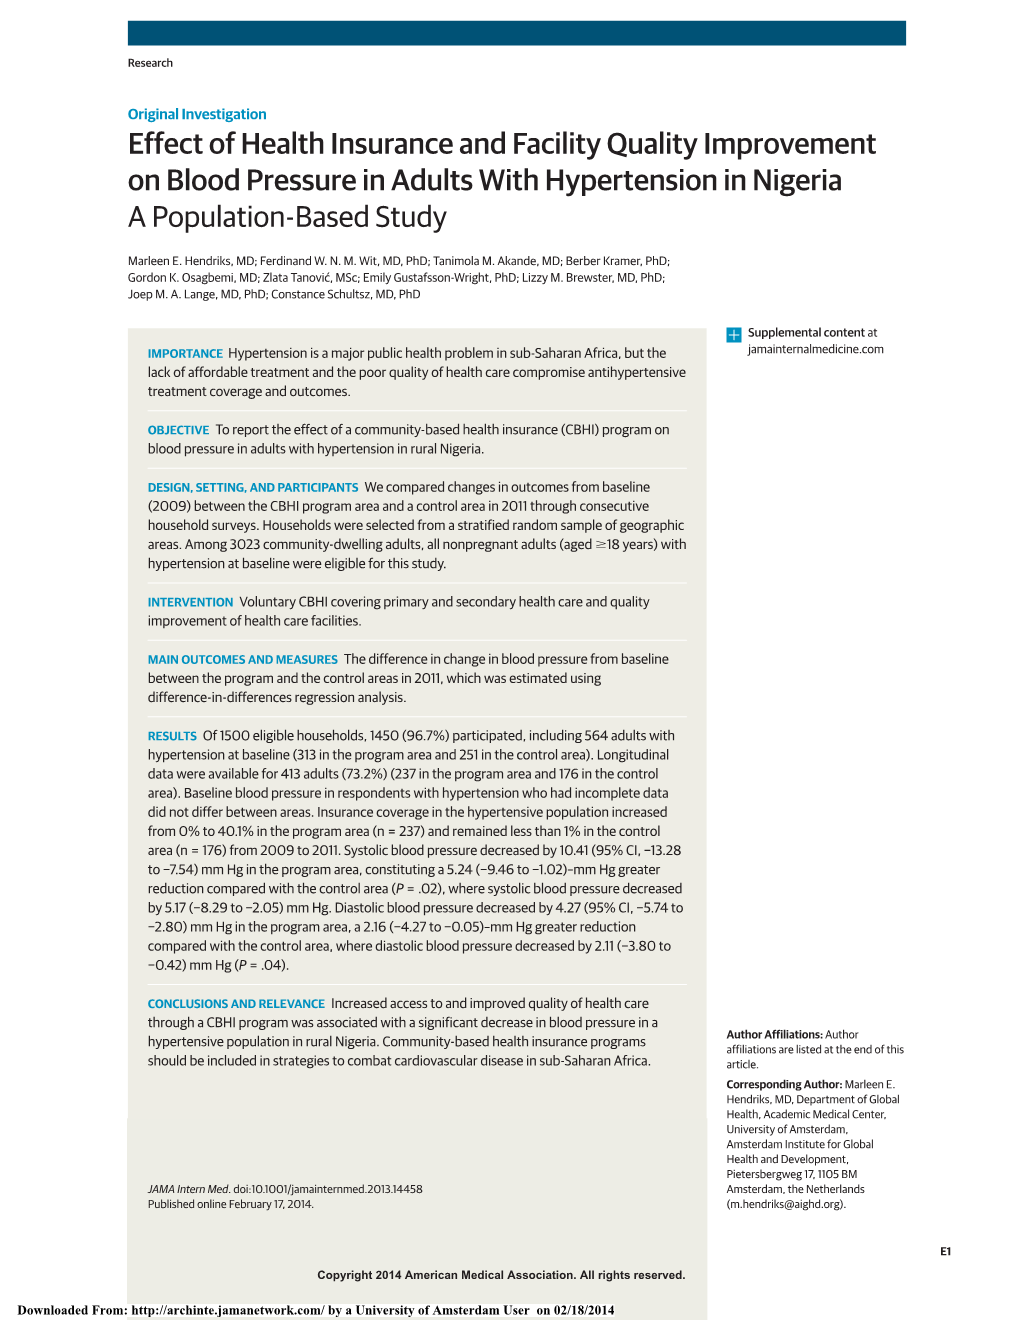 Effect of Health Insurance and Facility Quality Improvement on Blood Pressure in Adults with Hypertension in Nigeria a Population-Based Study